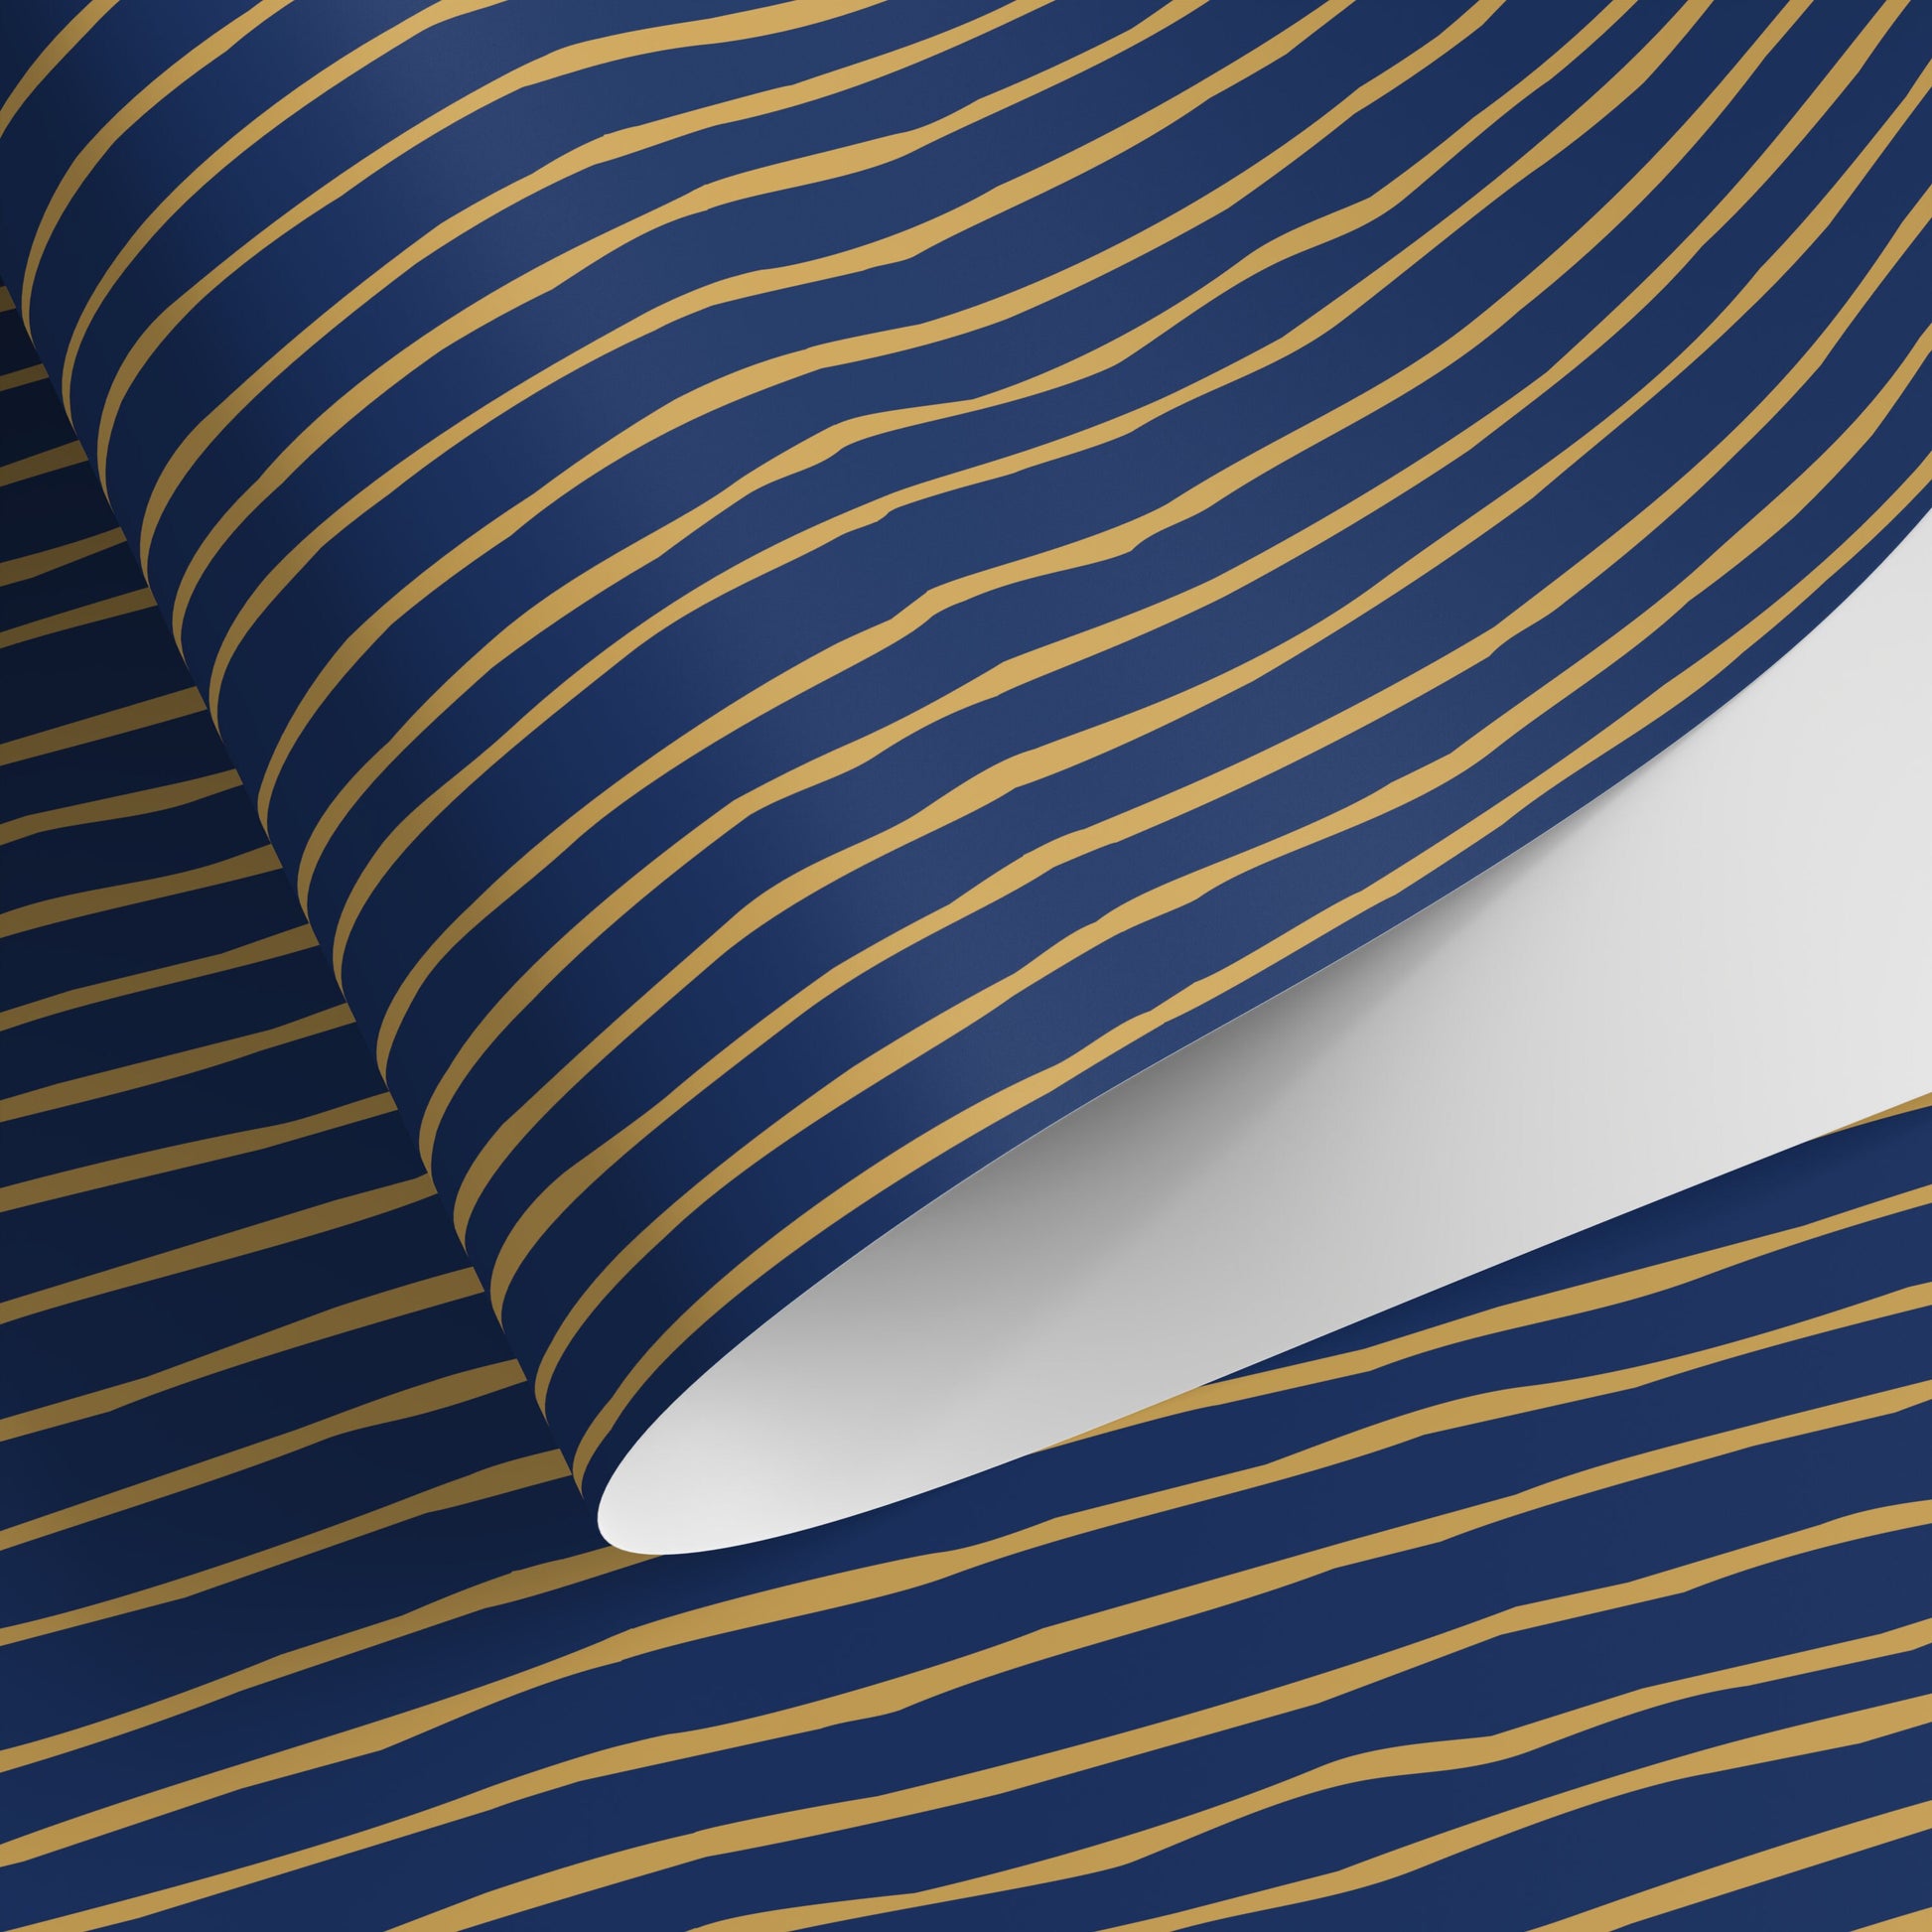 Gold and Navy Striped Wallpaper Modern Peel and Stick and Traditional Wallpaper - D774